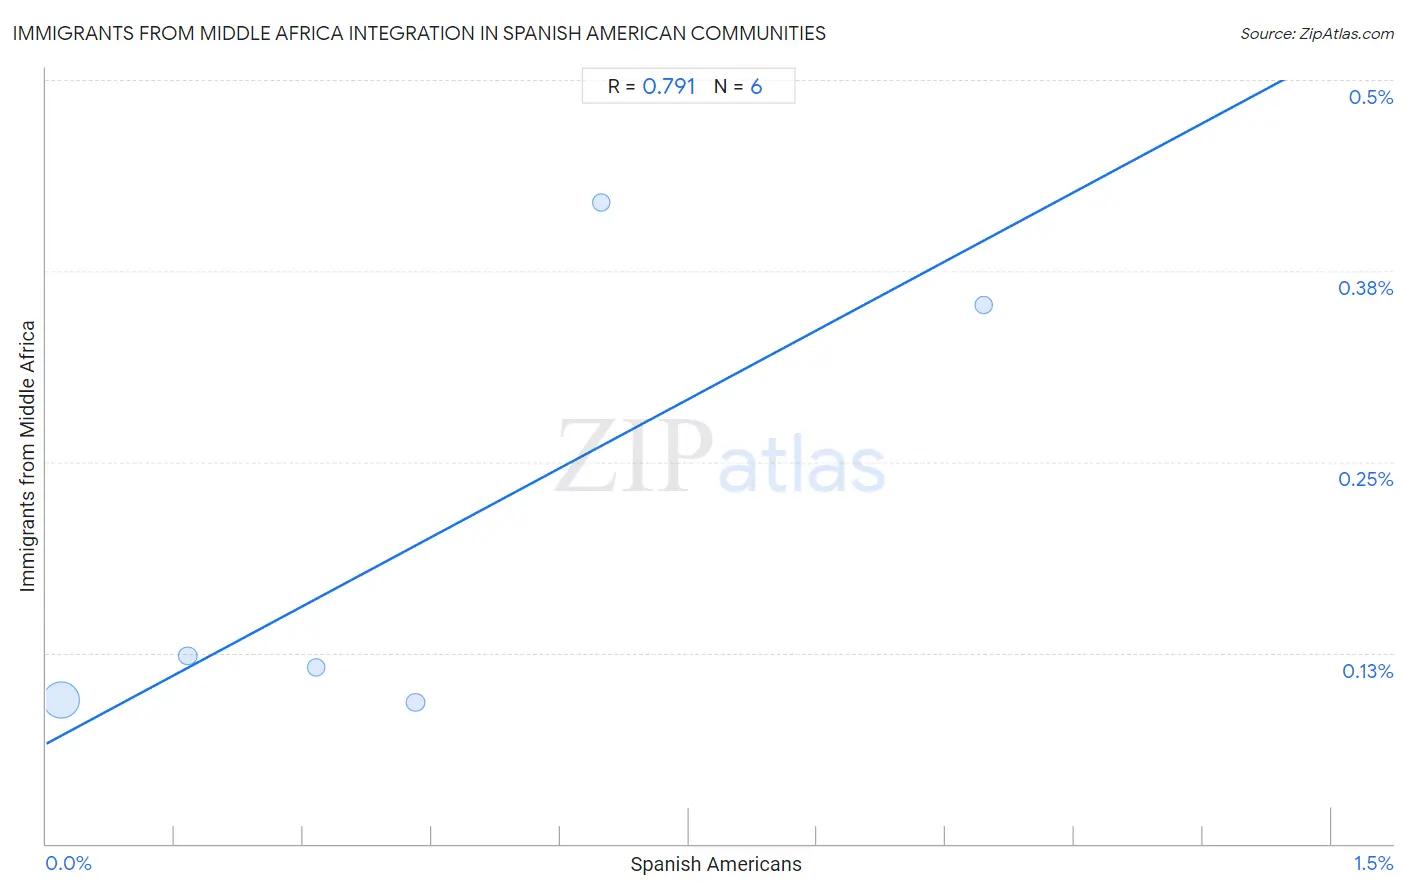 Spanish American Integration in Immigrants from Middle Africa Communities